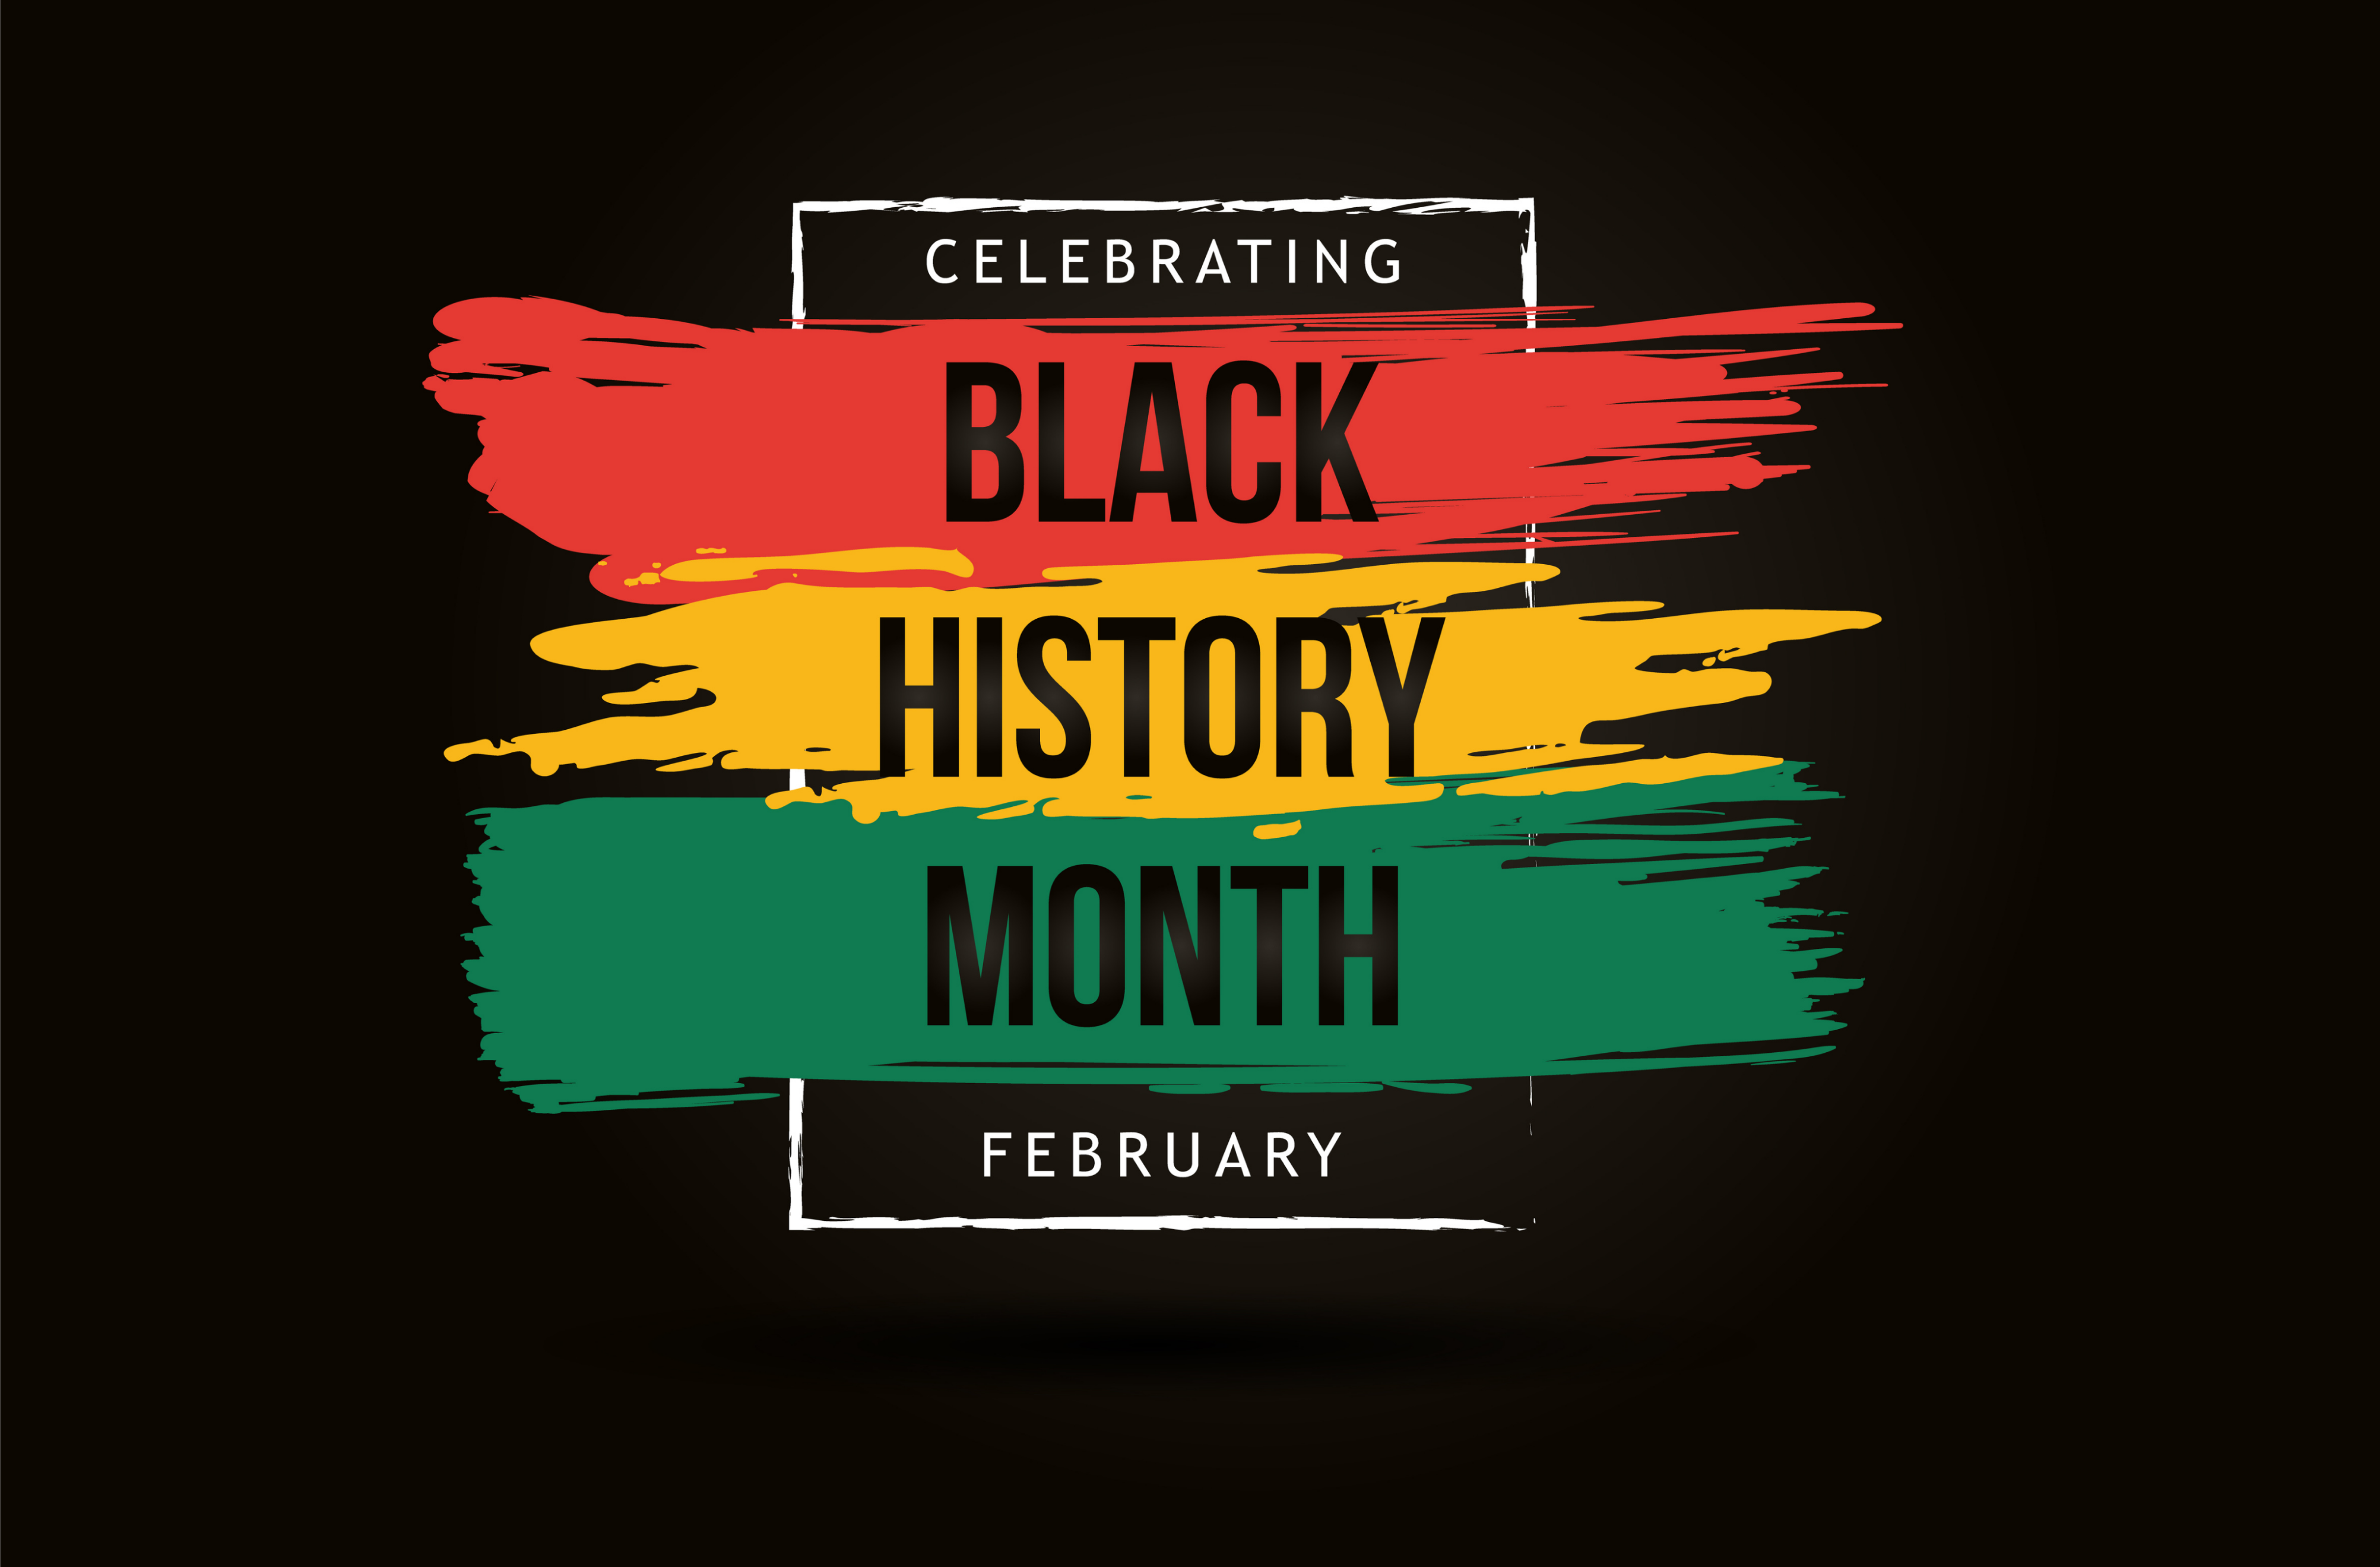 Celebrate Black History Month by Supporting Black-owned Businesses - The  Whole U